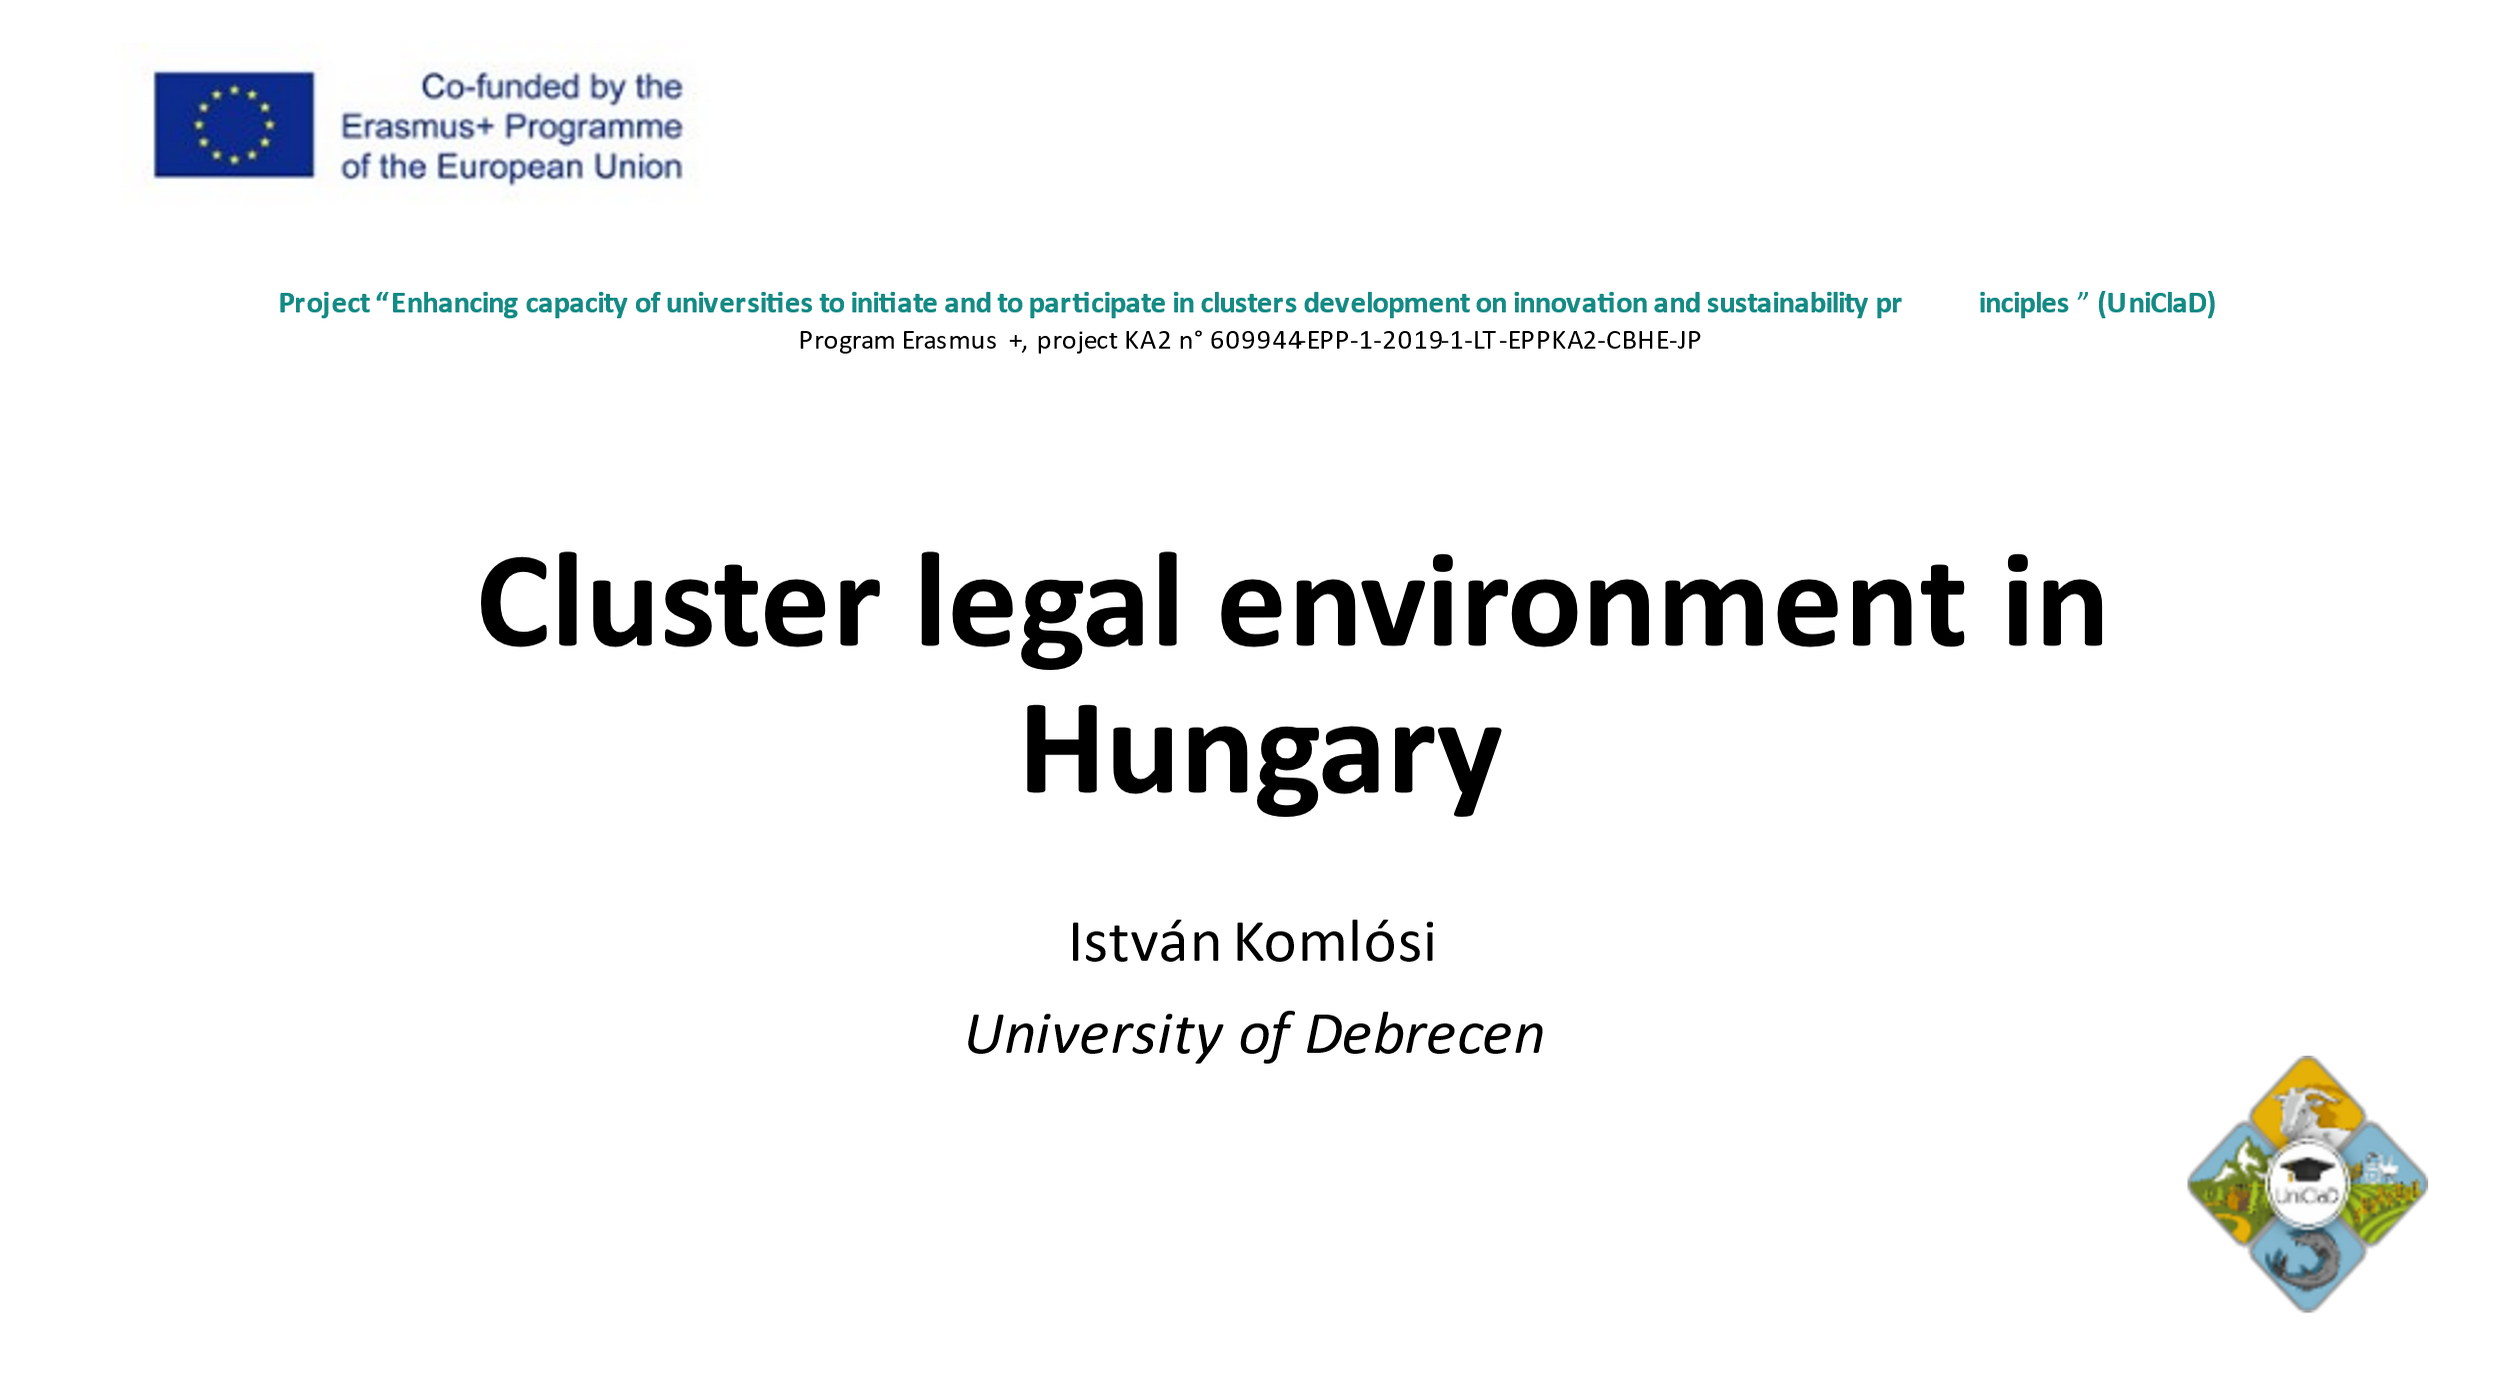 Cluster legal environment in Hungary